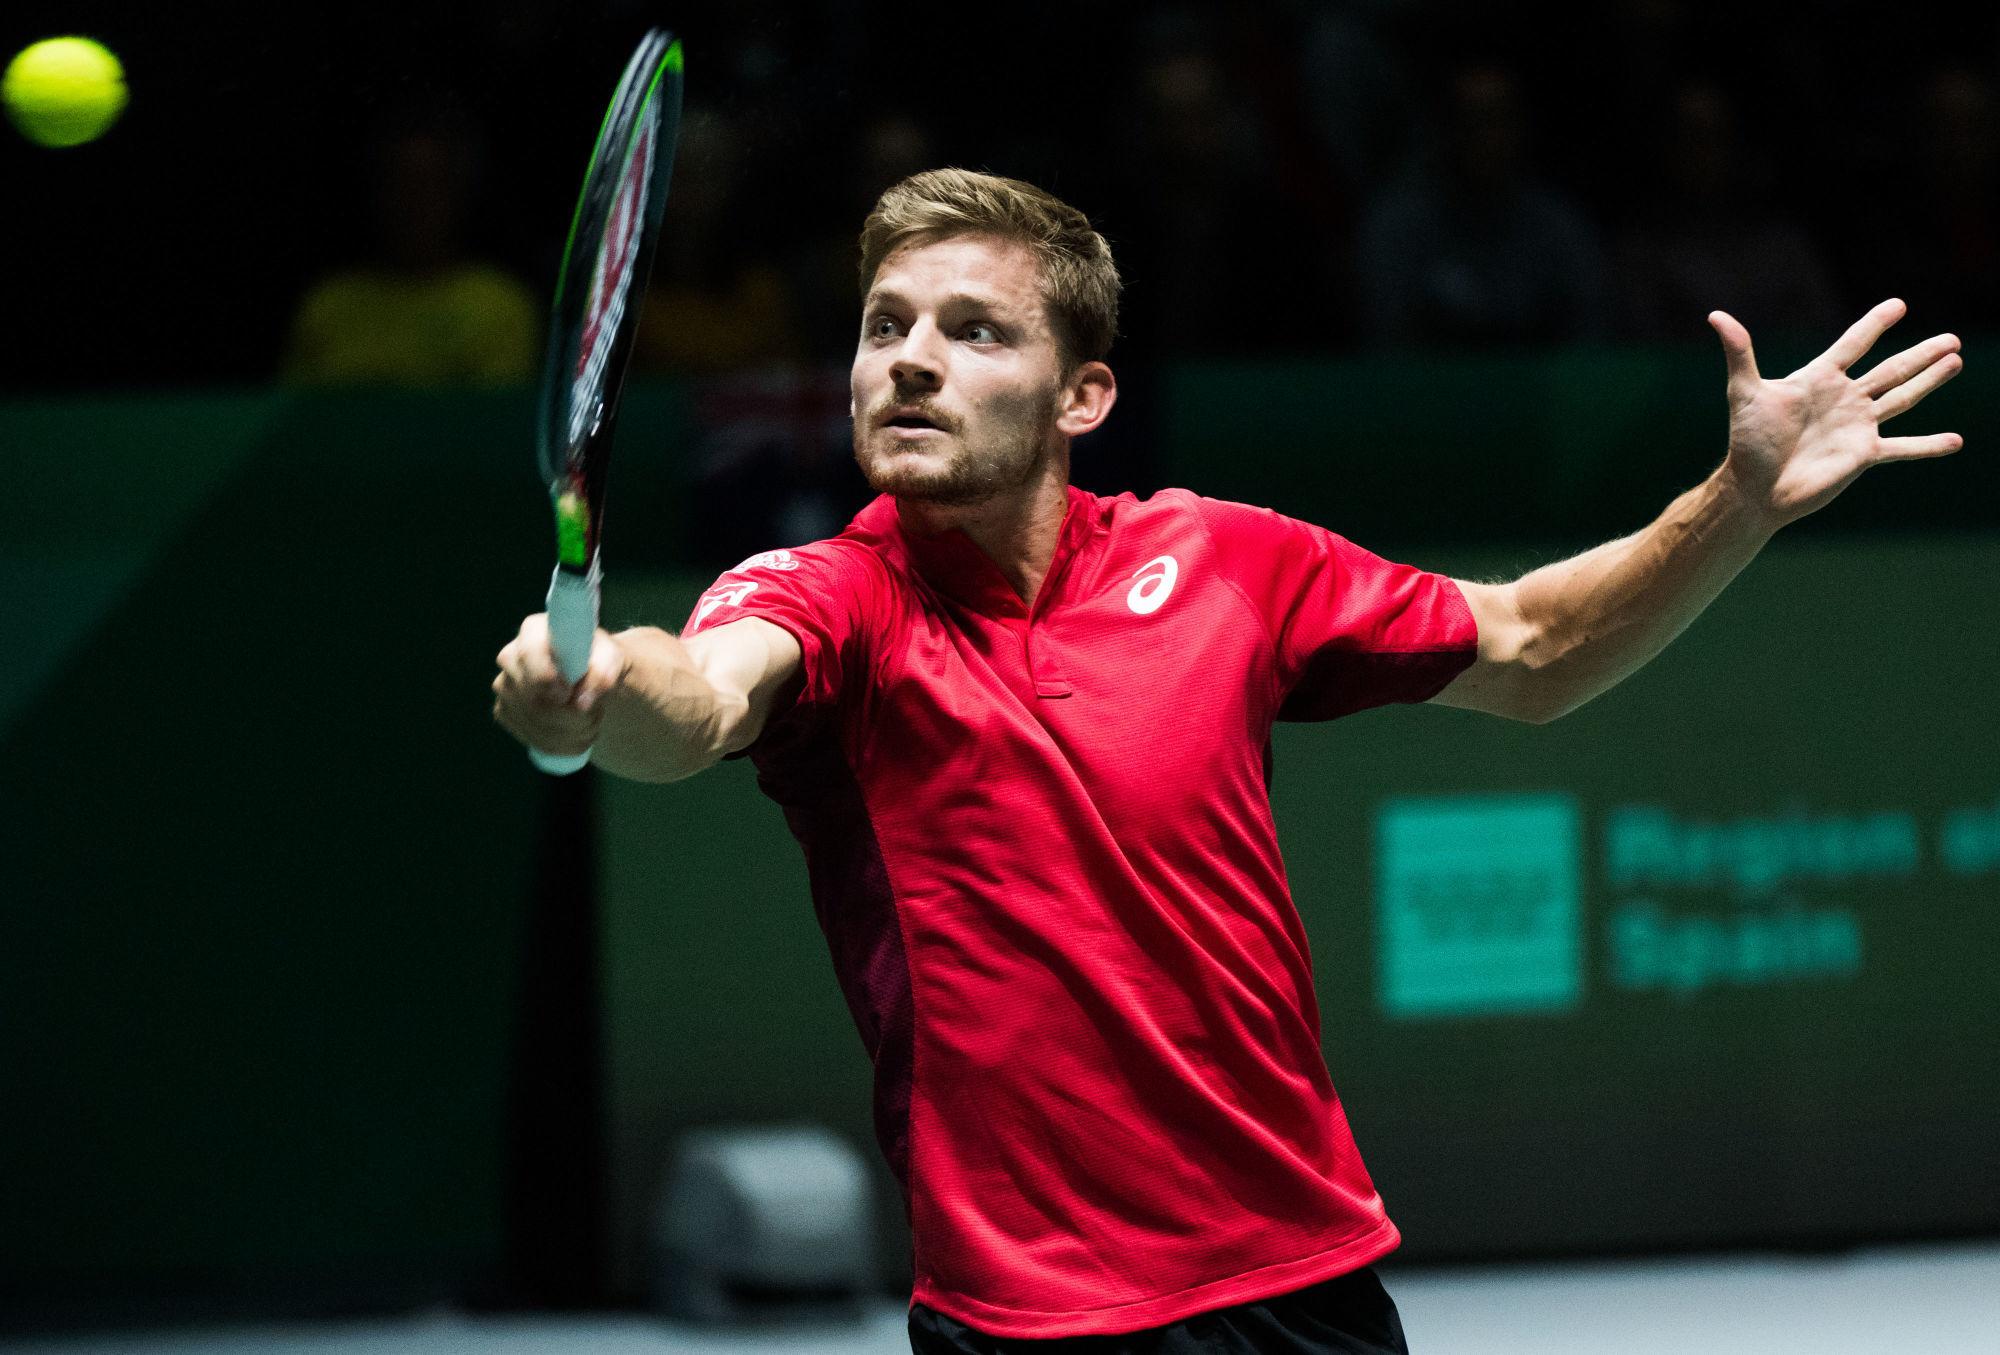 Belgian David Goffin pictured in action during a tennis match against Australian Alex de Minaur, the second match in the David Cup meeting between Belgium and Australia, Wednesday 20 November 2019, in Madrid, Spain. Belgium and Australia are playing the second game in group D of the group stage of the Davis Cup World Group tennis finals. Both countries won their first meeting. BELGA PHOTO BENOIT DOPPAGNE 

Photo by Icon Sport - David GOFFIN